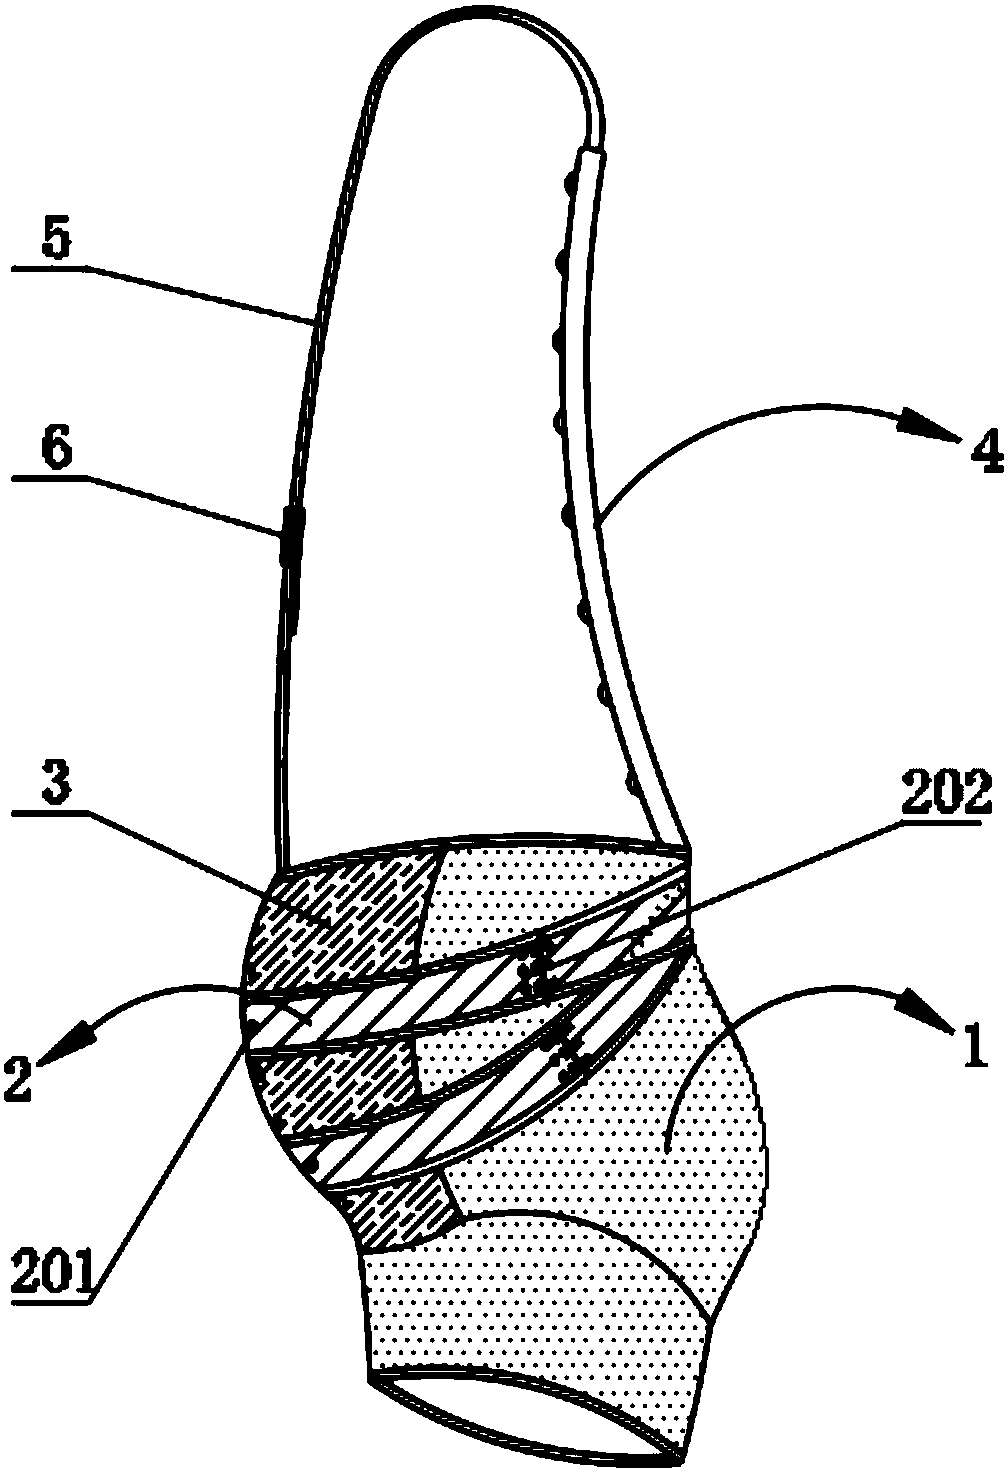 Abdomen protection device for pregnant women during pregnancy